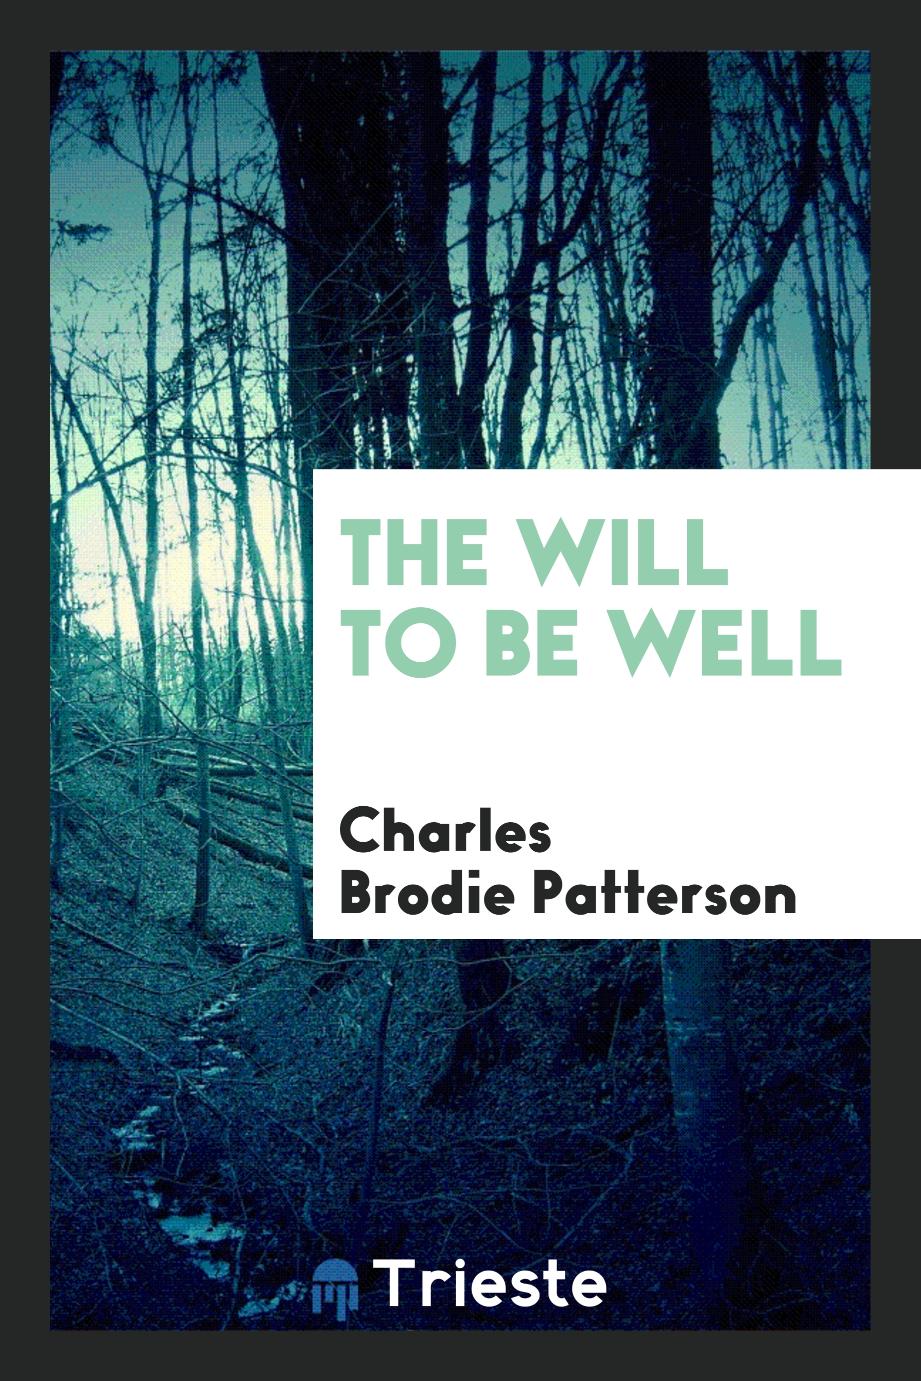 The Will to be Well